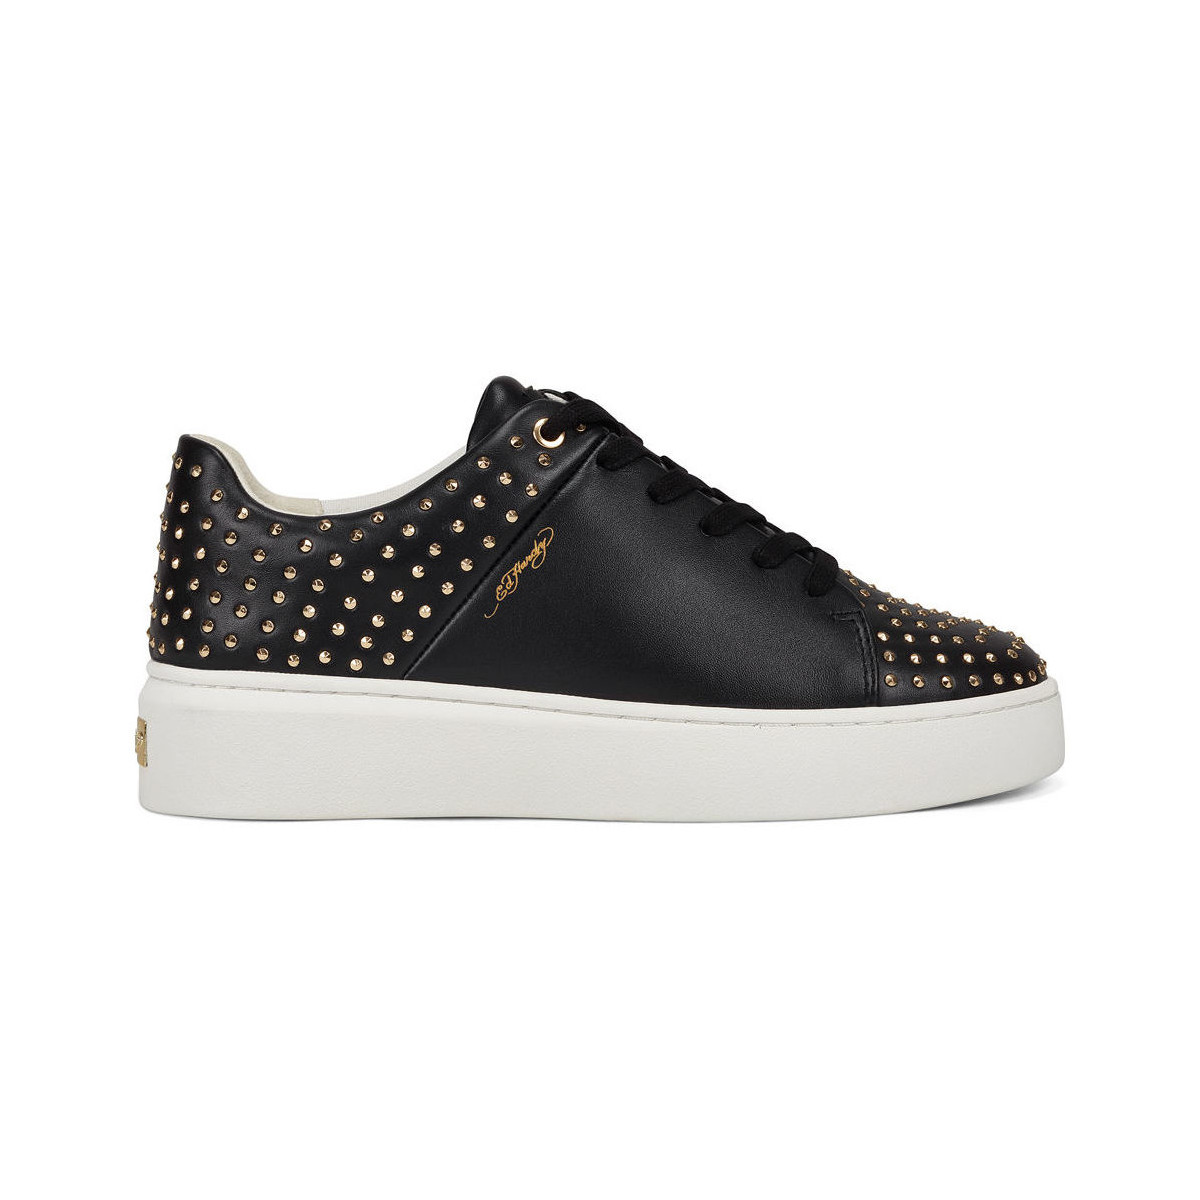 Xαμηλά Sneakers Ed Hardy – Stud-ed low top black/gold